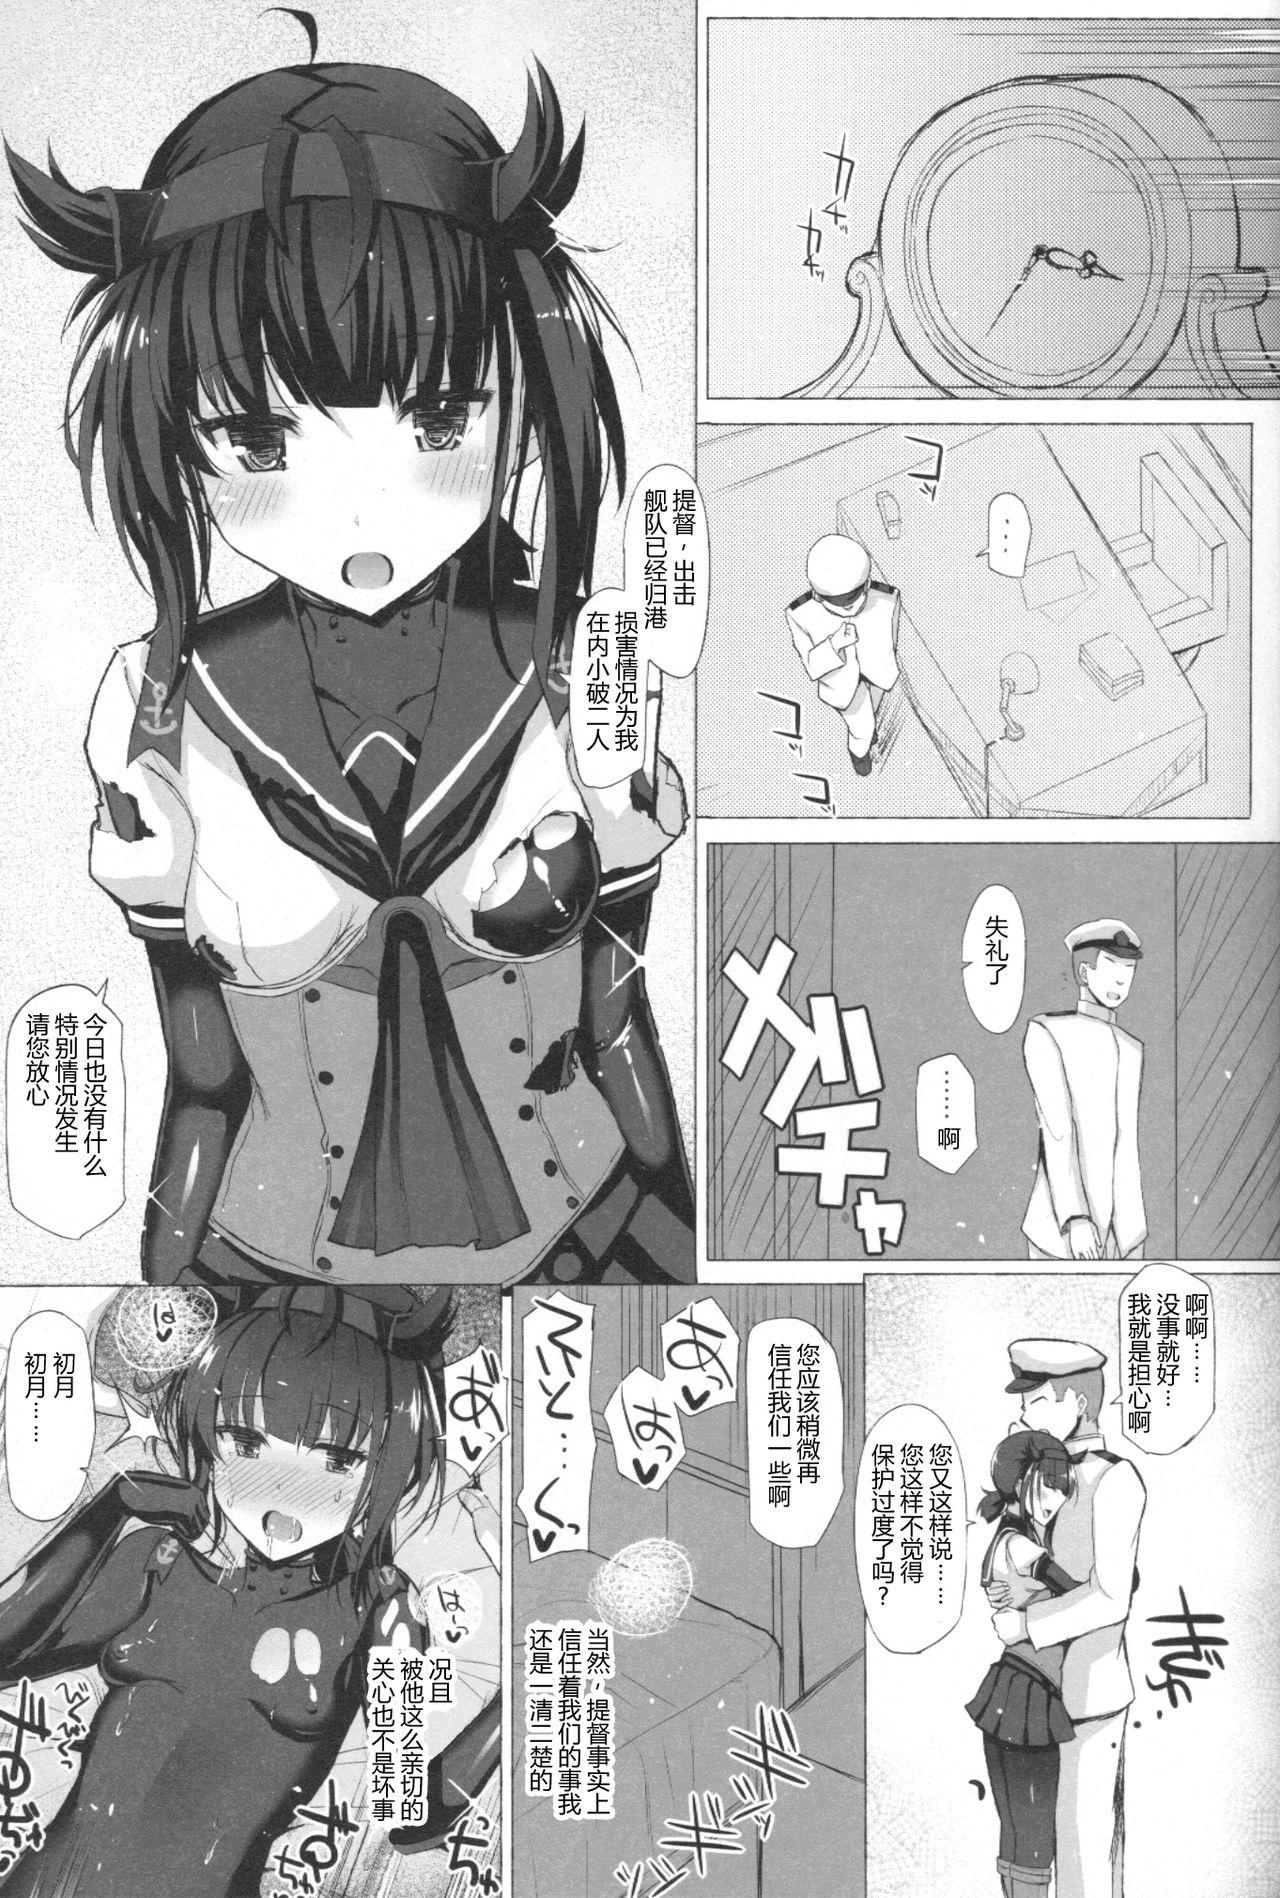 Stud LOVE IS THE DRUG - Kantai collection Prostituta - Page 2